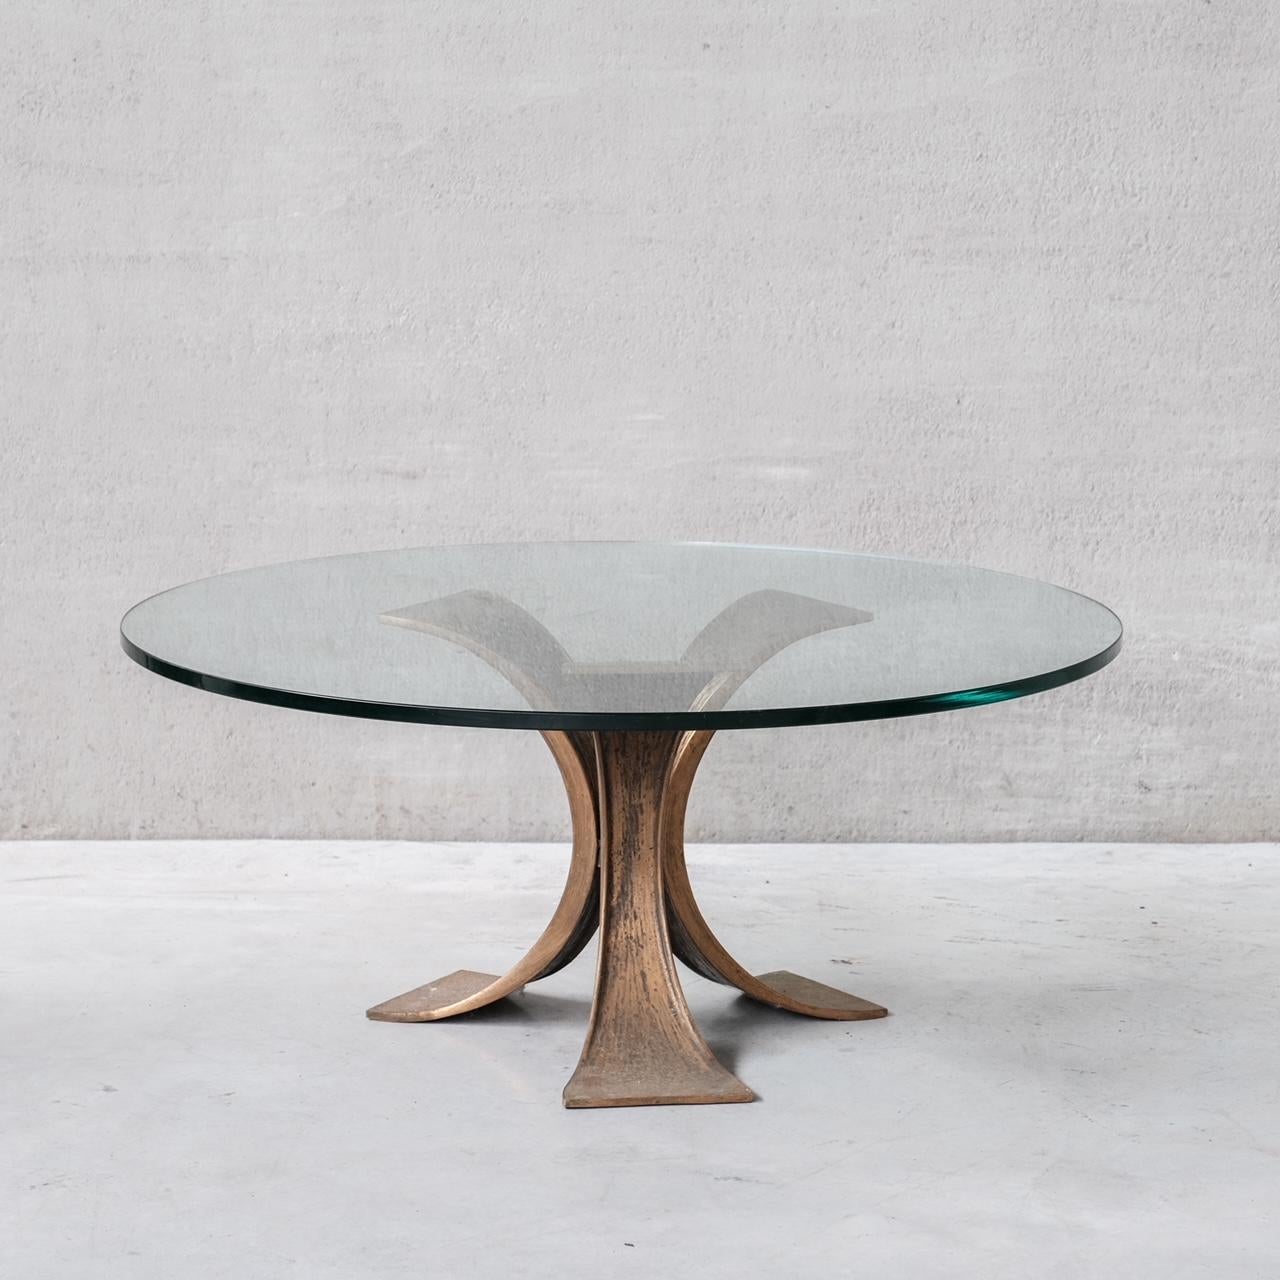 A bronze, splayed coffee table with thick circular glass top. 

Belgium, c1970s. 

Two available, PRICED AND SOLD INDIVIDUALLY. 

Good condition.

Location: Belgium Gallery.

Dimensions: 48 H x 110 Diameter in cm.

Delivery: POA

We